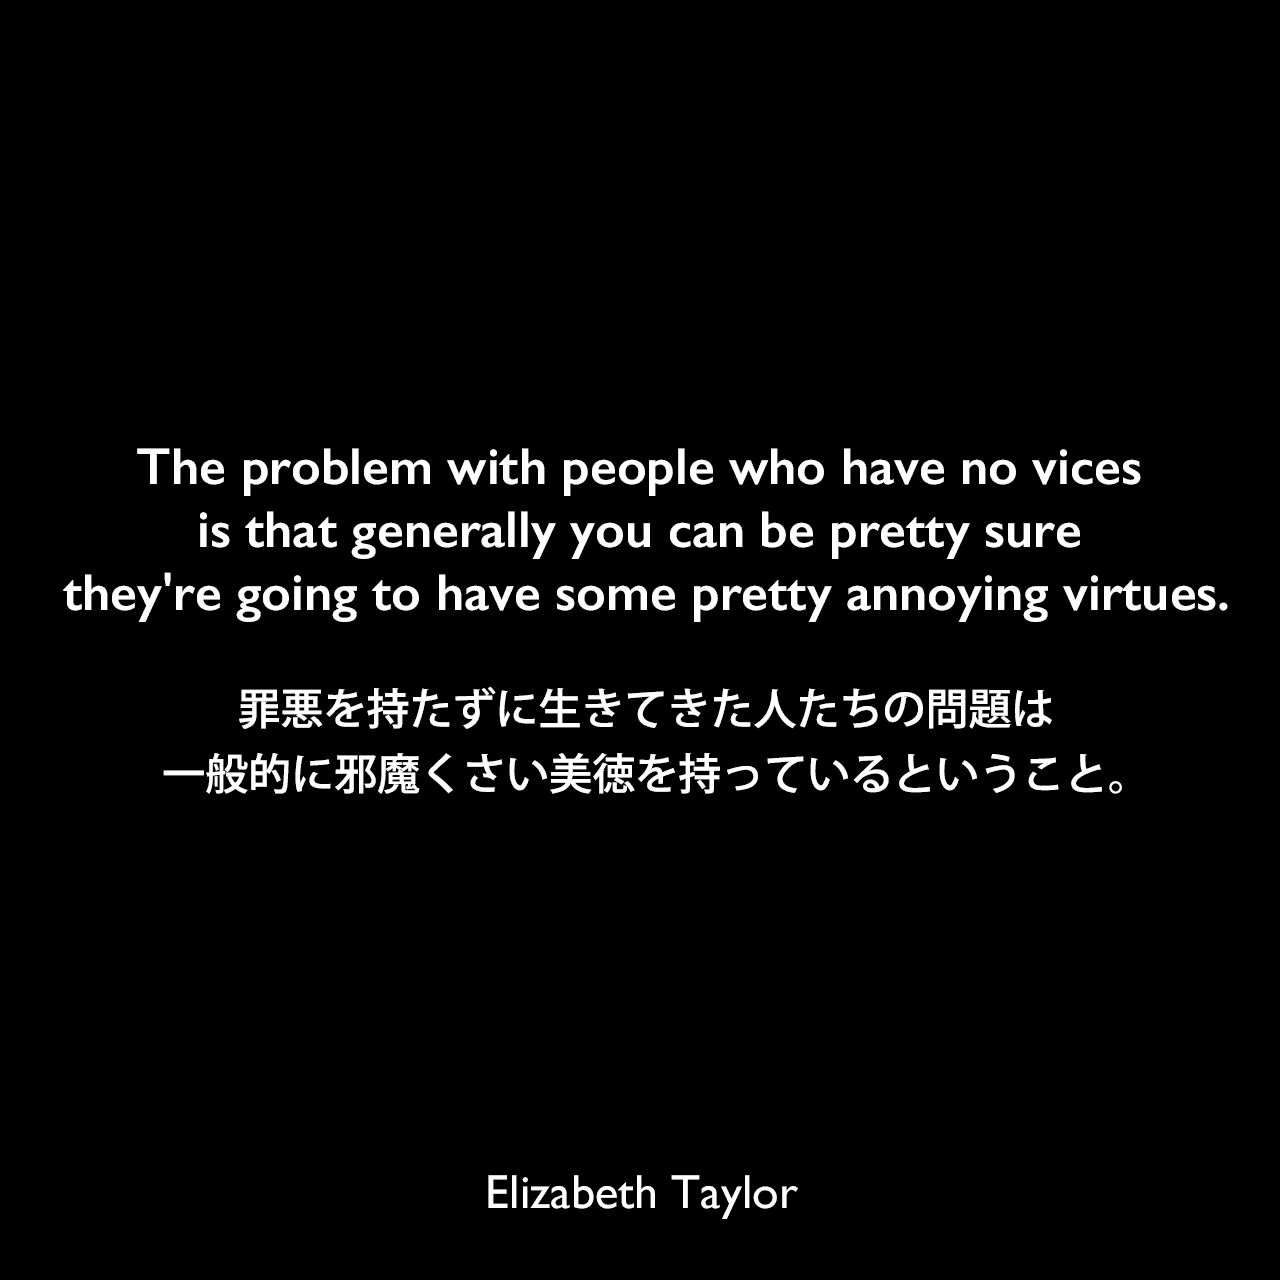 The problem with people who have no vices is that generally you can be pretty sure they're going to have some pretty annoying virtues.罪悪を持たずに生きてきた人たちの問題は、一般的に邪魔くさい美徳を持っているということ。Elizabeth Taylor